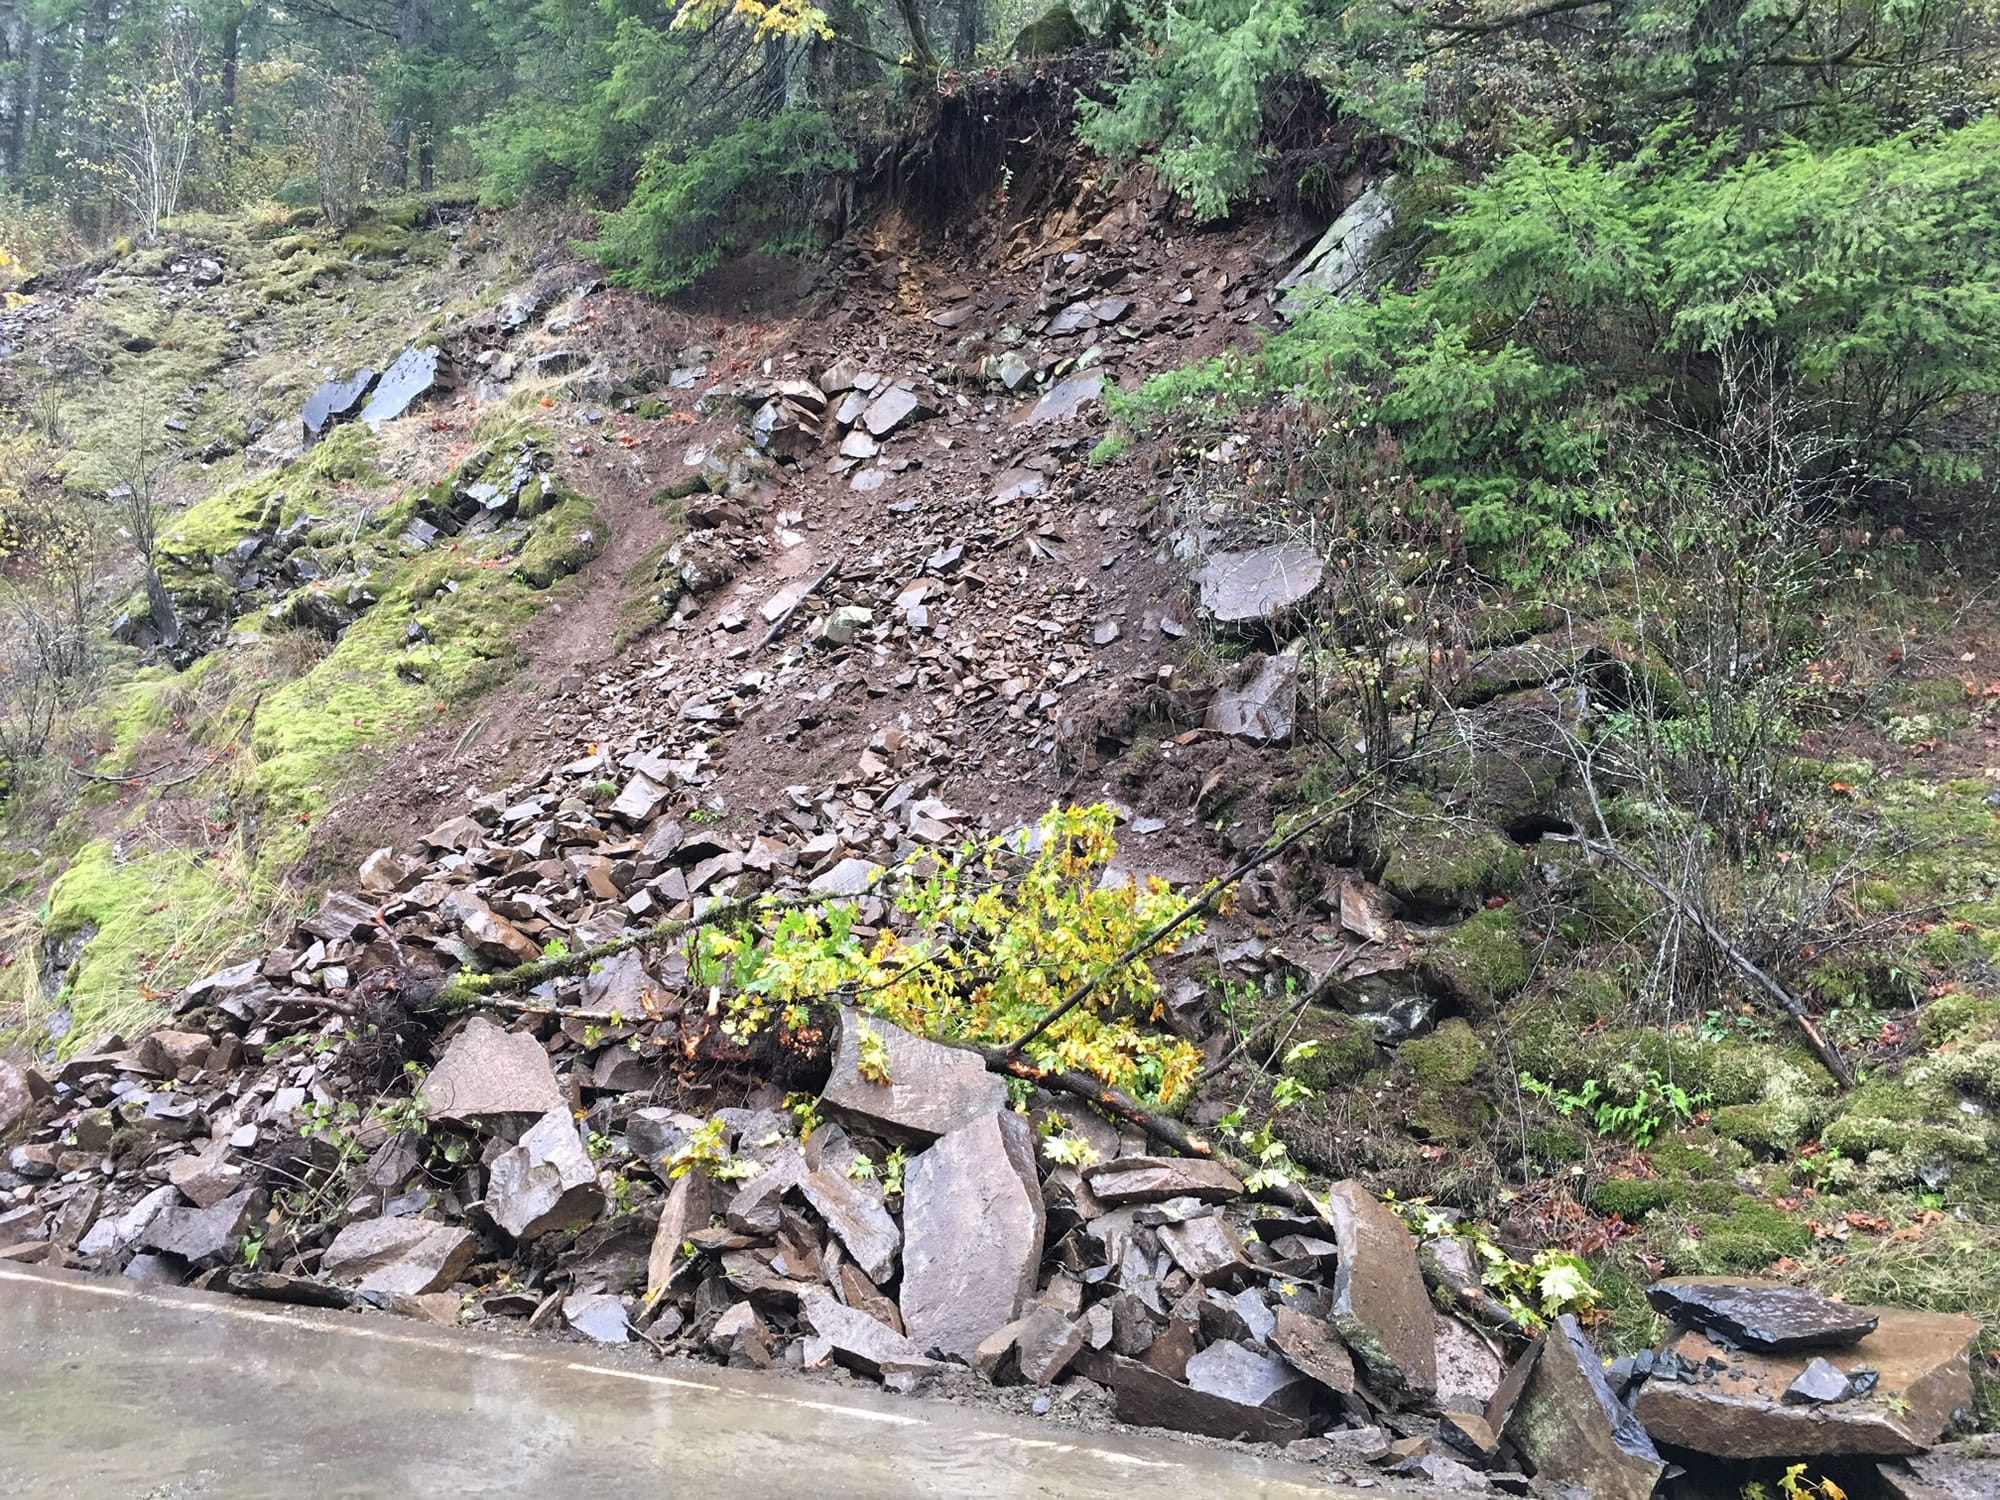 A landslide has closed Washougal River Road in both directions at Milepost 4.